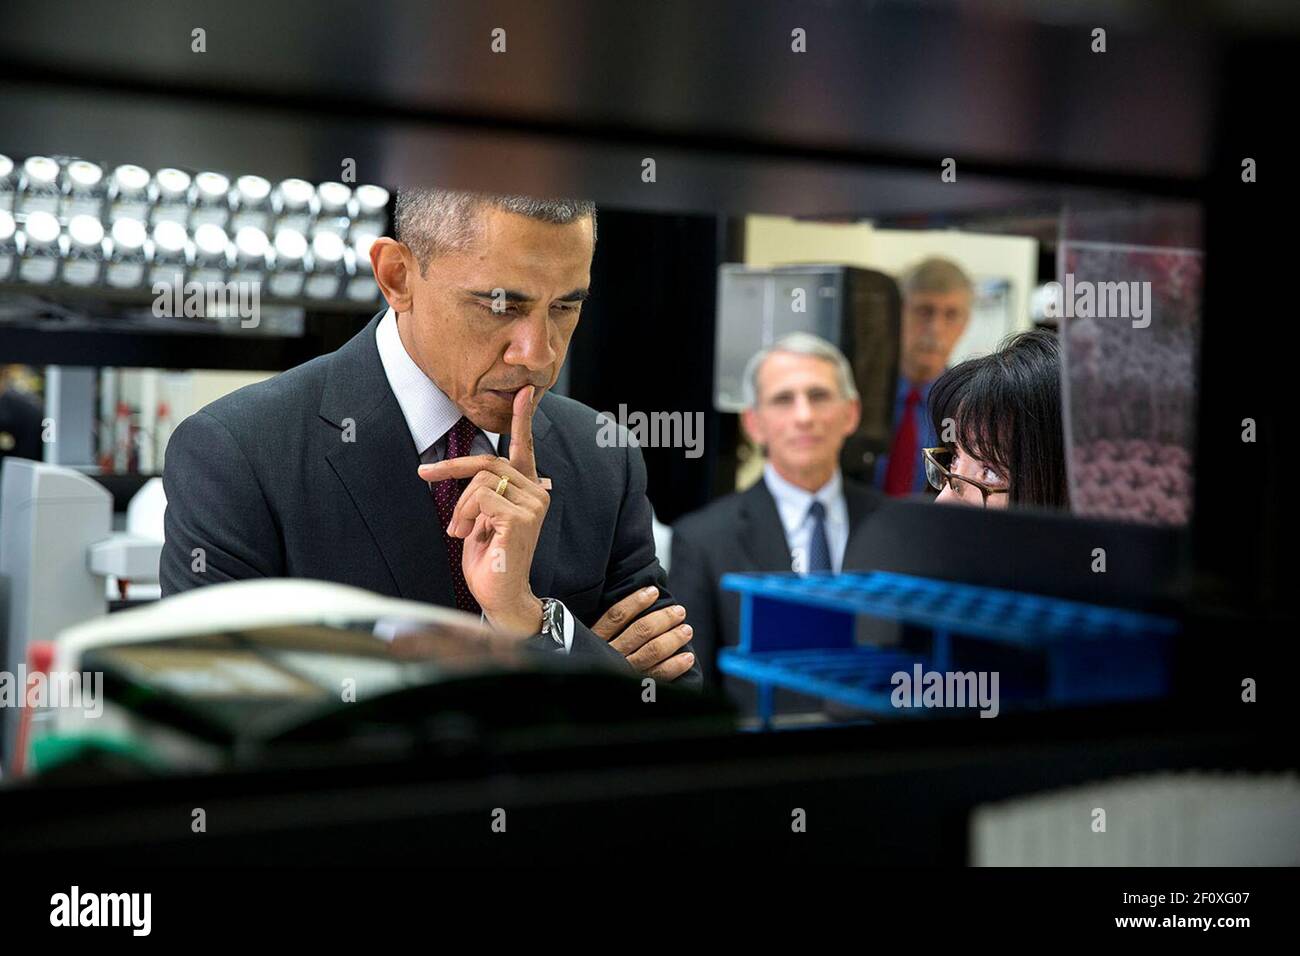 President Barack Obama listens to Dr. Nancy Sullivan during a lab tour at the Vaccine Research Center at the National Institutes of Health in Bethesda, Md., Dec. 2, 2014. Dr. Anthony Fauci, Director, National Institute of Allergy and Infectious Diseases and Dr. Francis Collins, Director, NIH watch in the background. Stock Photo